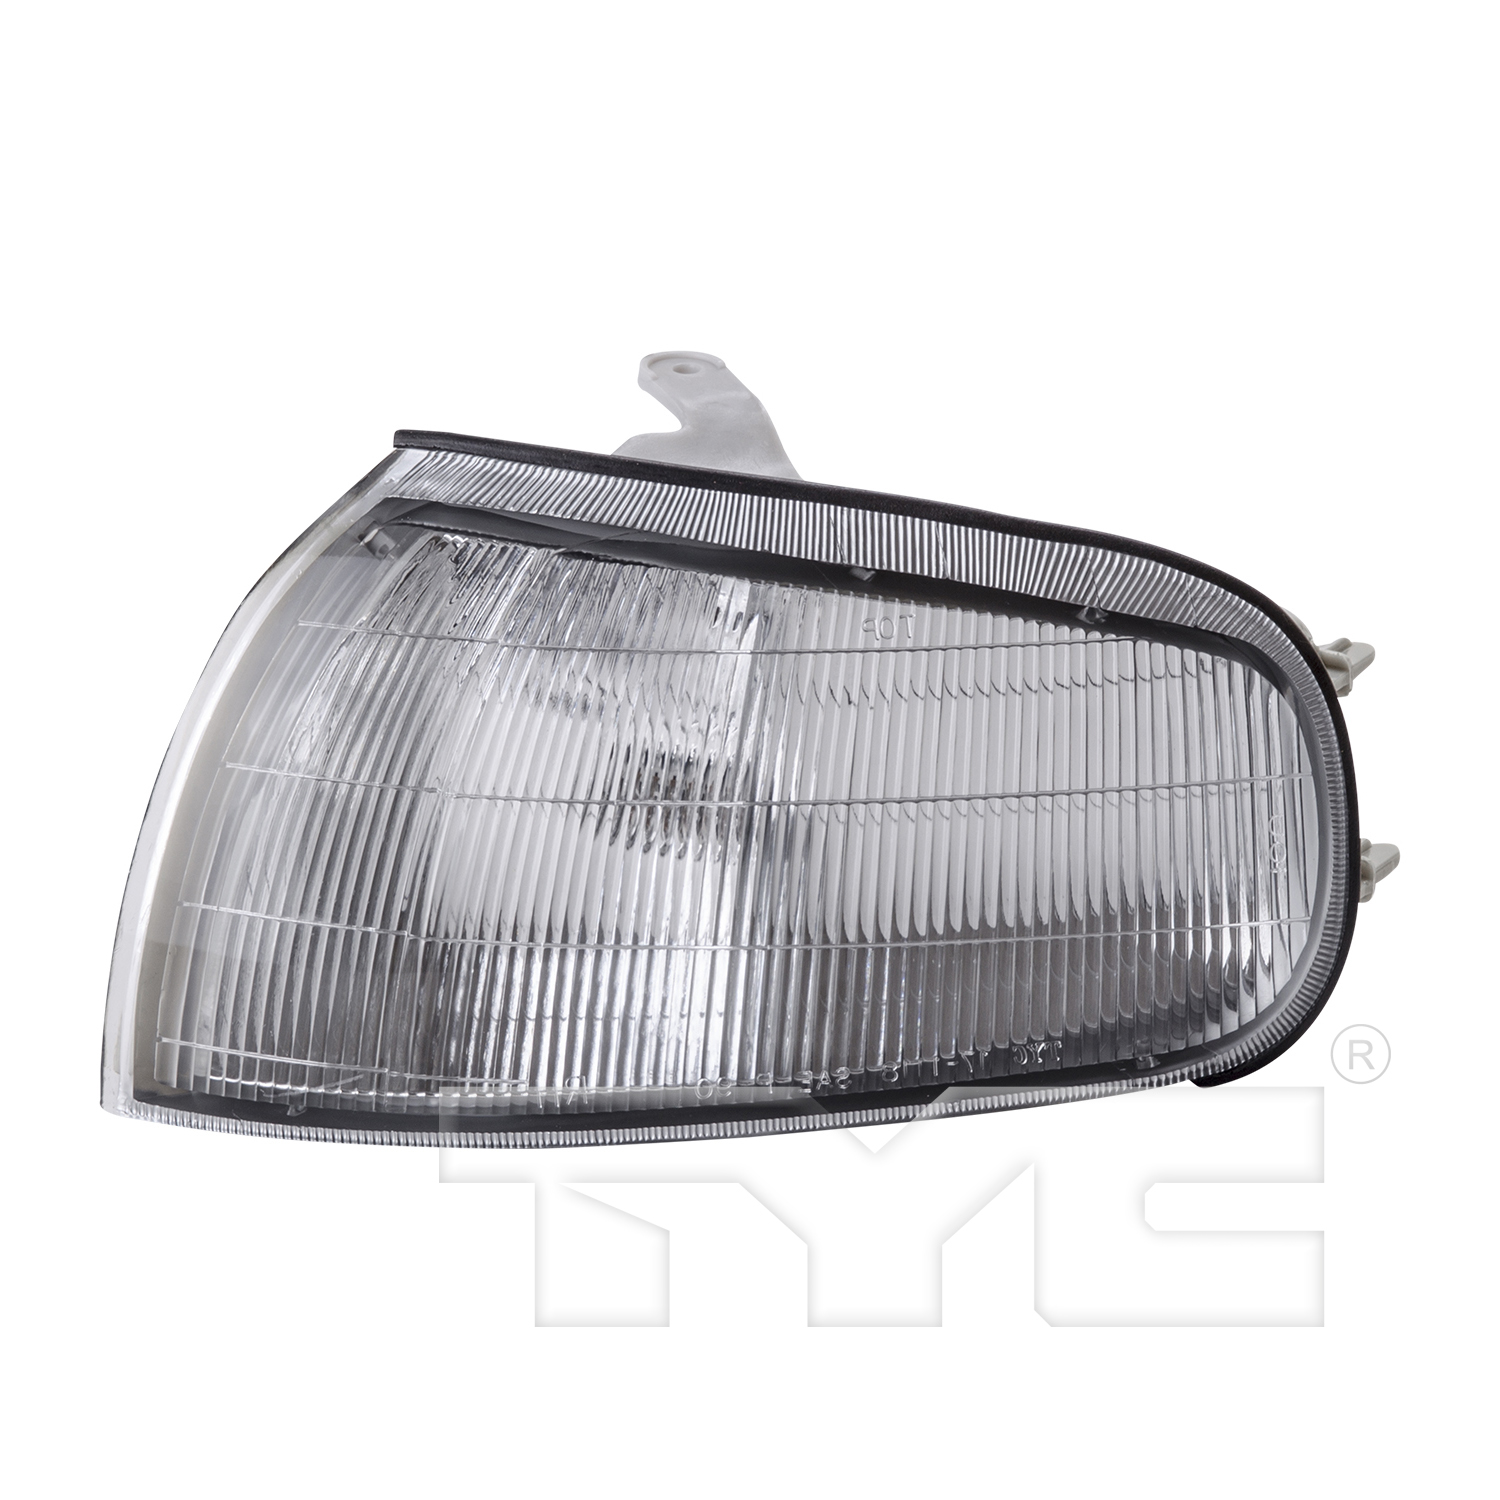 Aftermarket LAMPS for TOYOTA - CAMRY, CAMRY,92-94,LT Parklamp assy